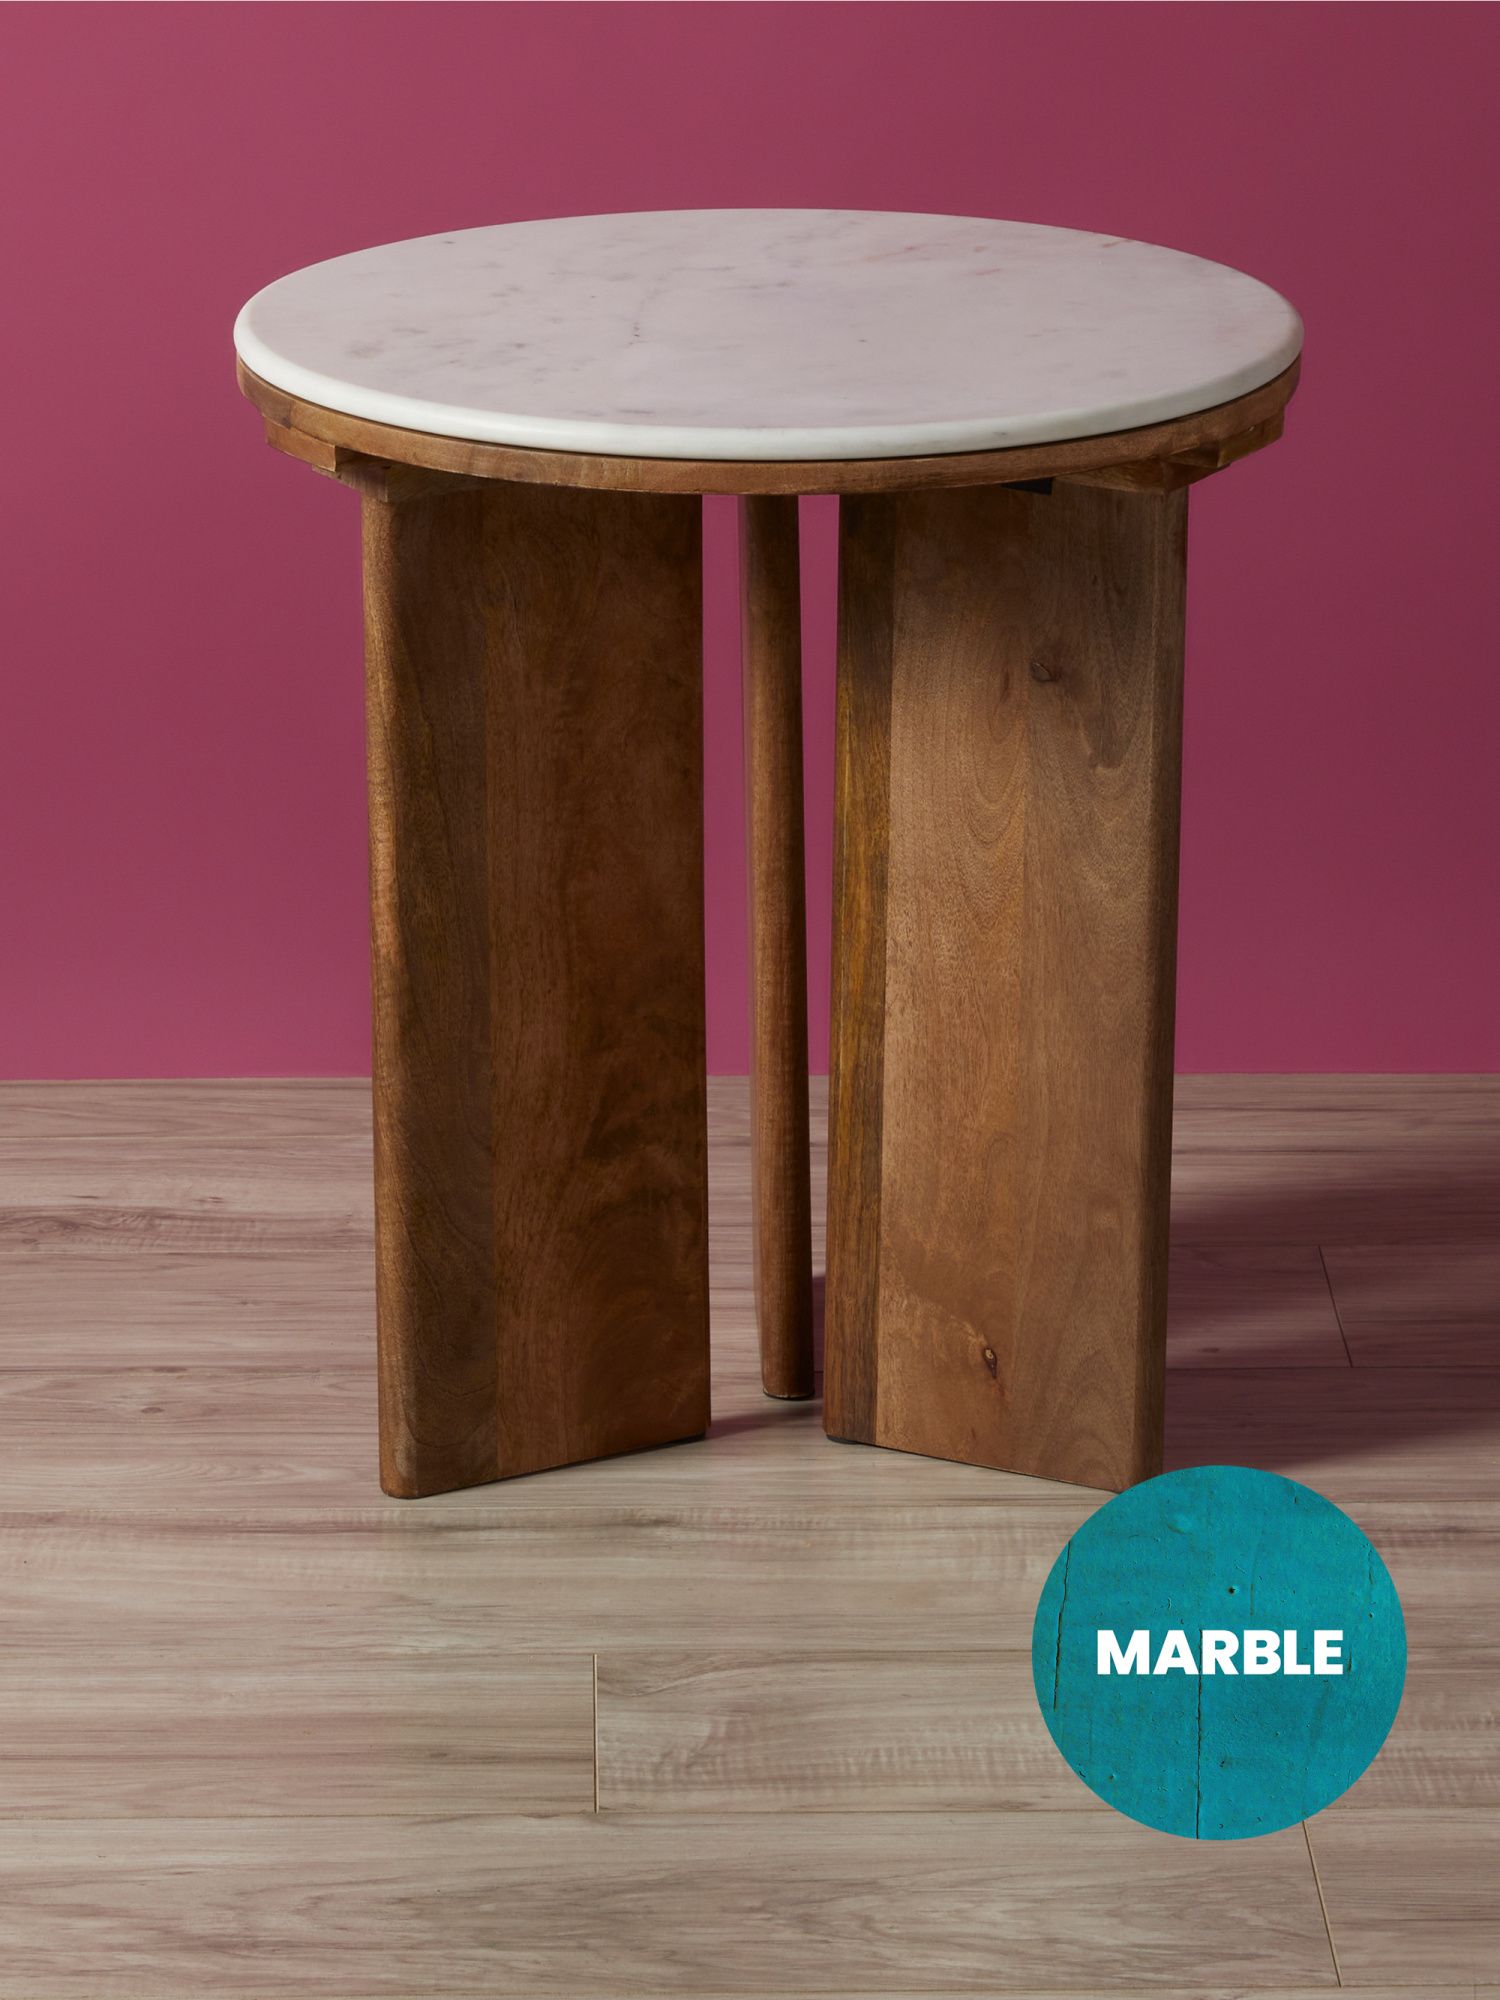 MADE IN INDIA
							
							22in Marble Top Wooden Side Table
						
						
							

	
		
						... | HomeGoods